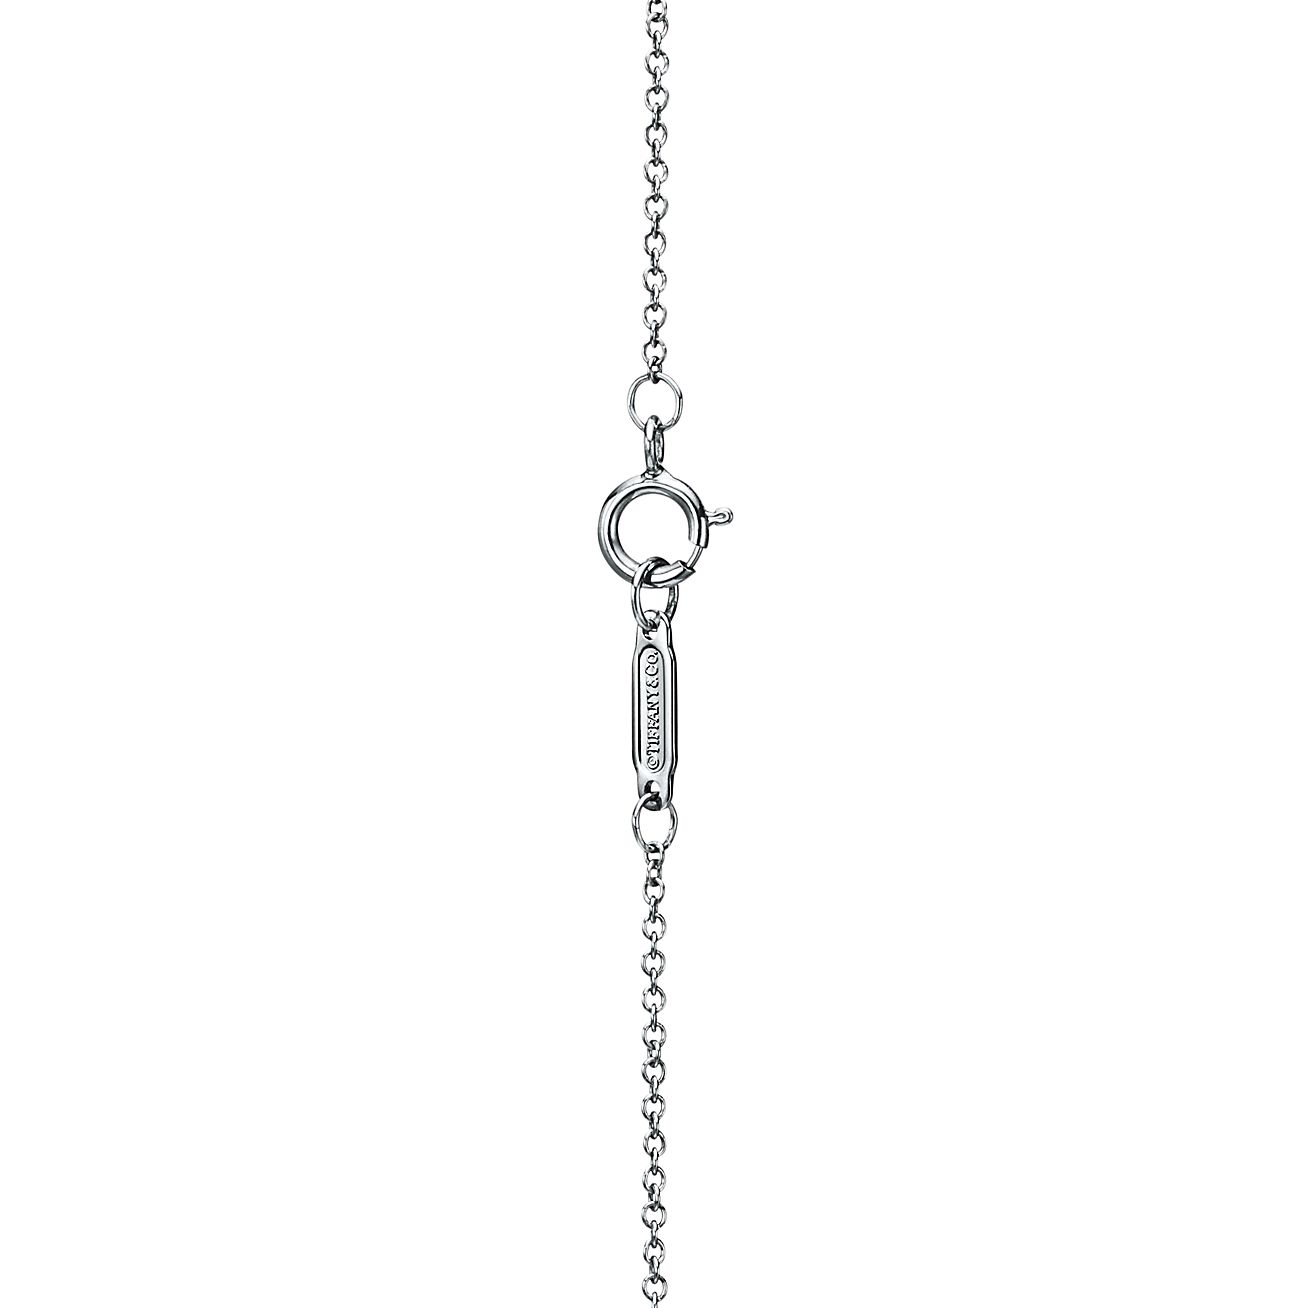 Pendant in 18k white gold with Tahitian pearls and diamonds.